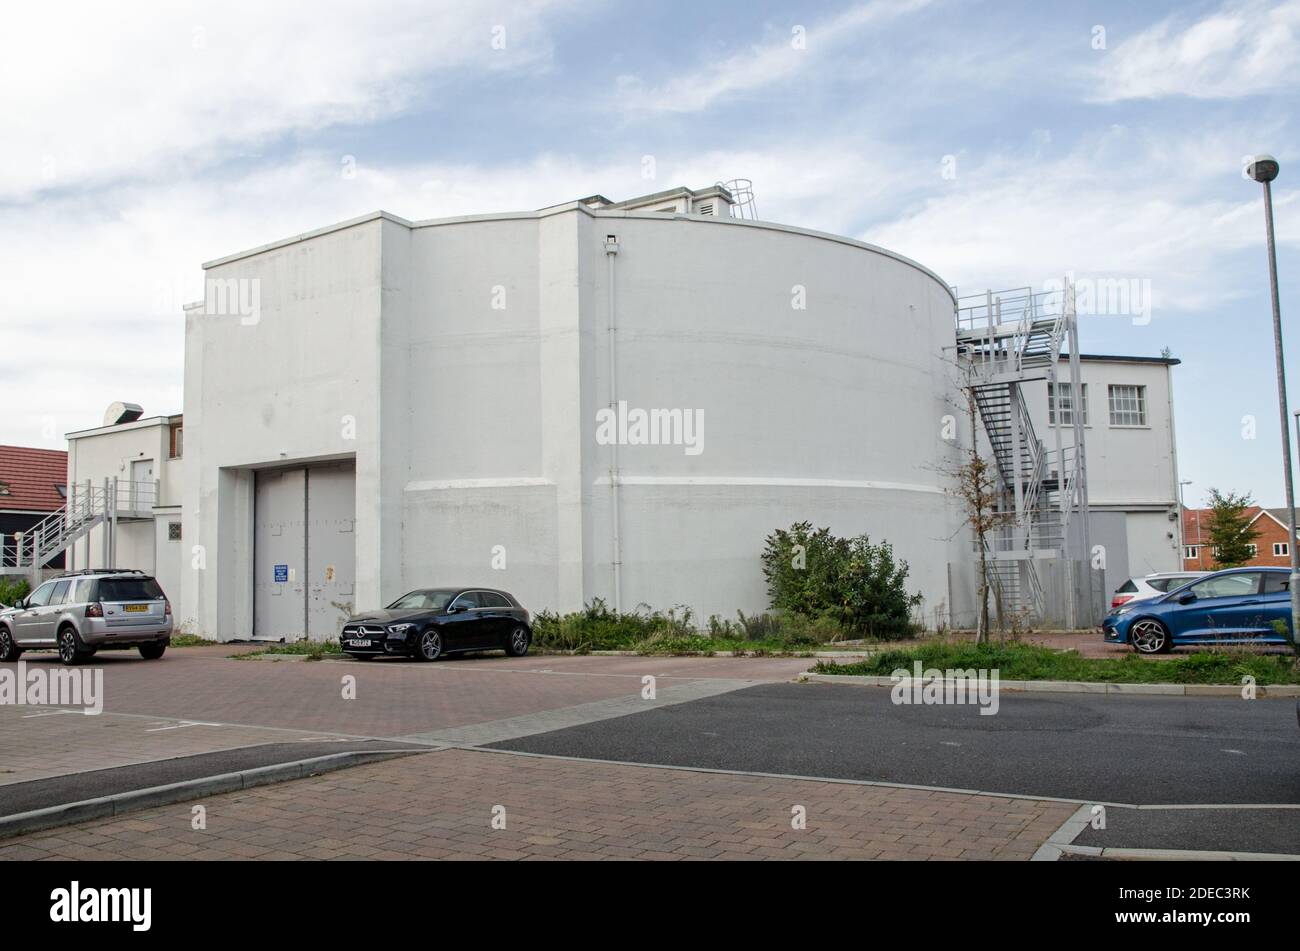 Farnborough, UK - September 18, 2020: Exterior of the former Royal Air Force Centrifuge testing centre where a large machine would spin fighter pilots Stock Photo